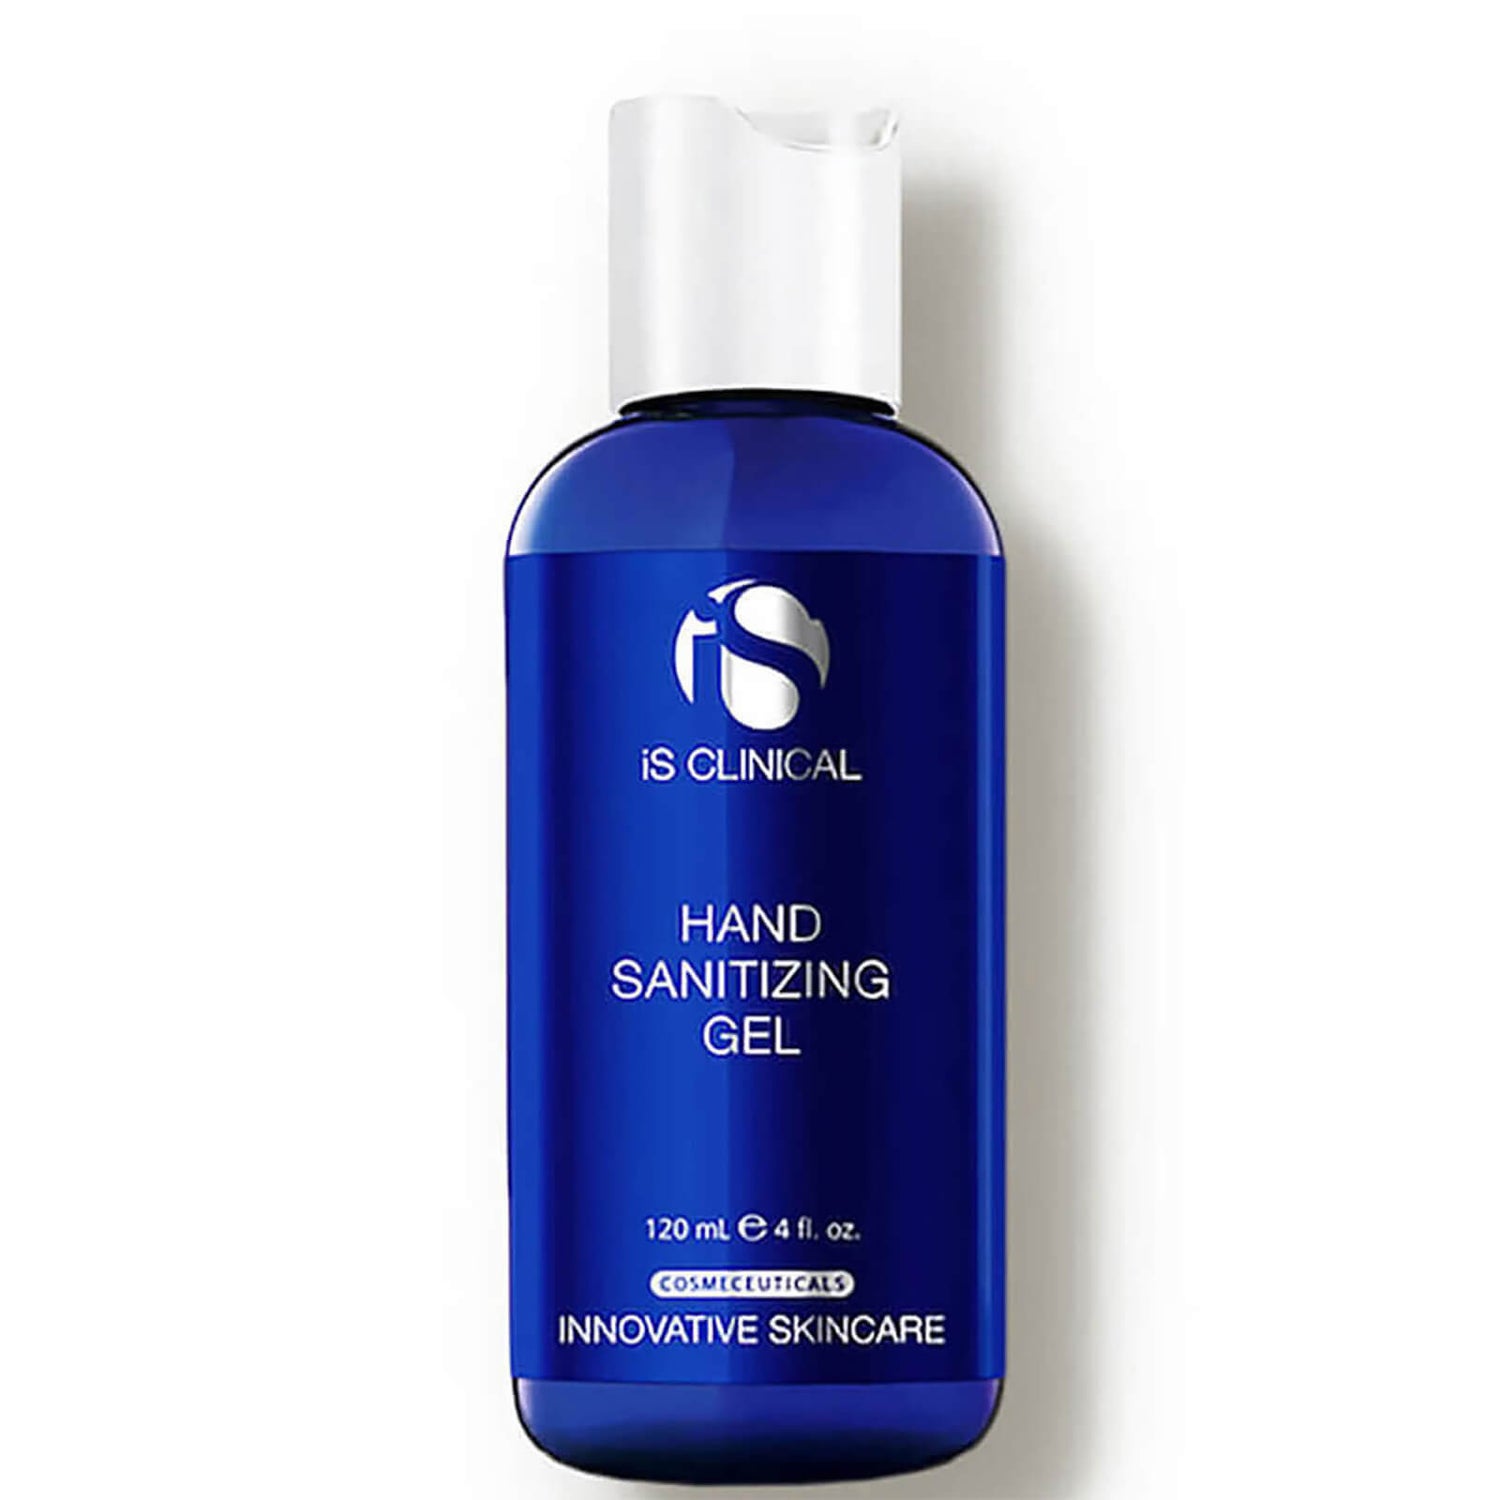 iS Clinical Hand Sanitizing Gel 120ml